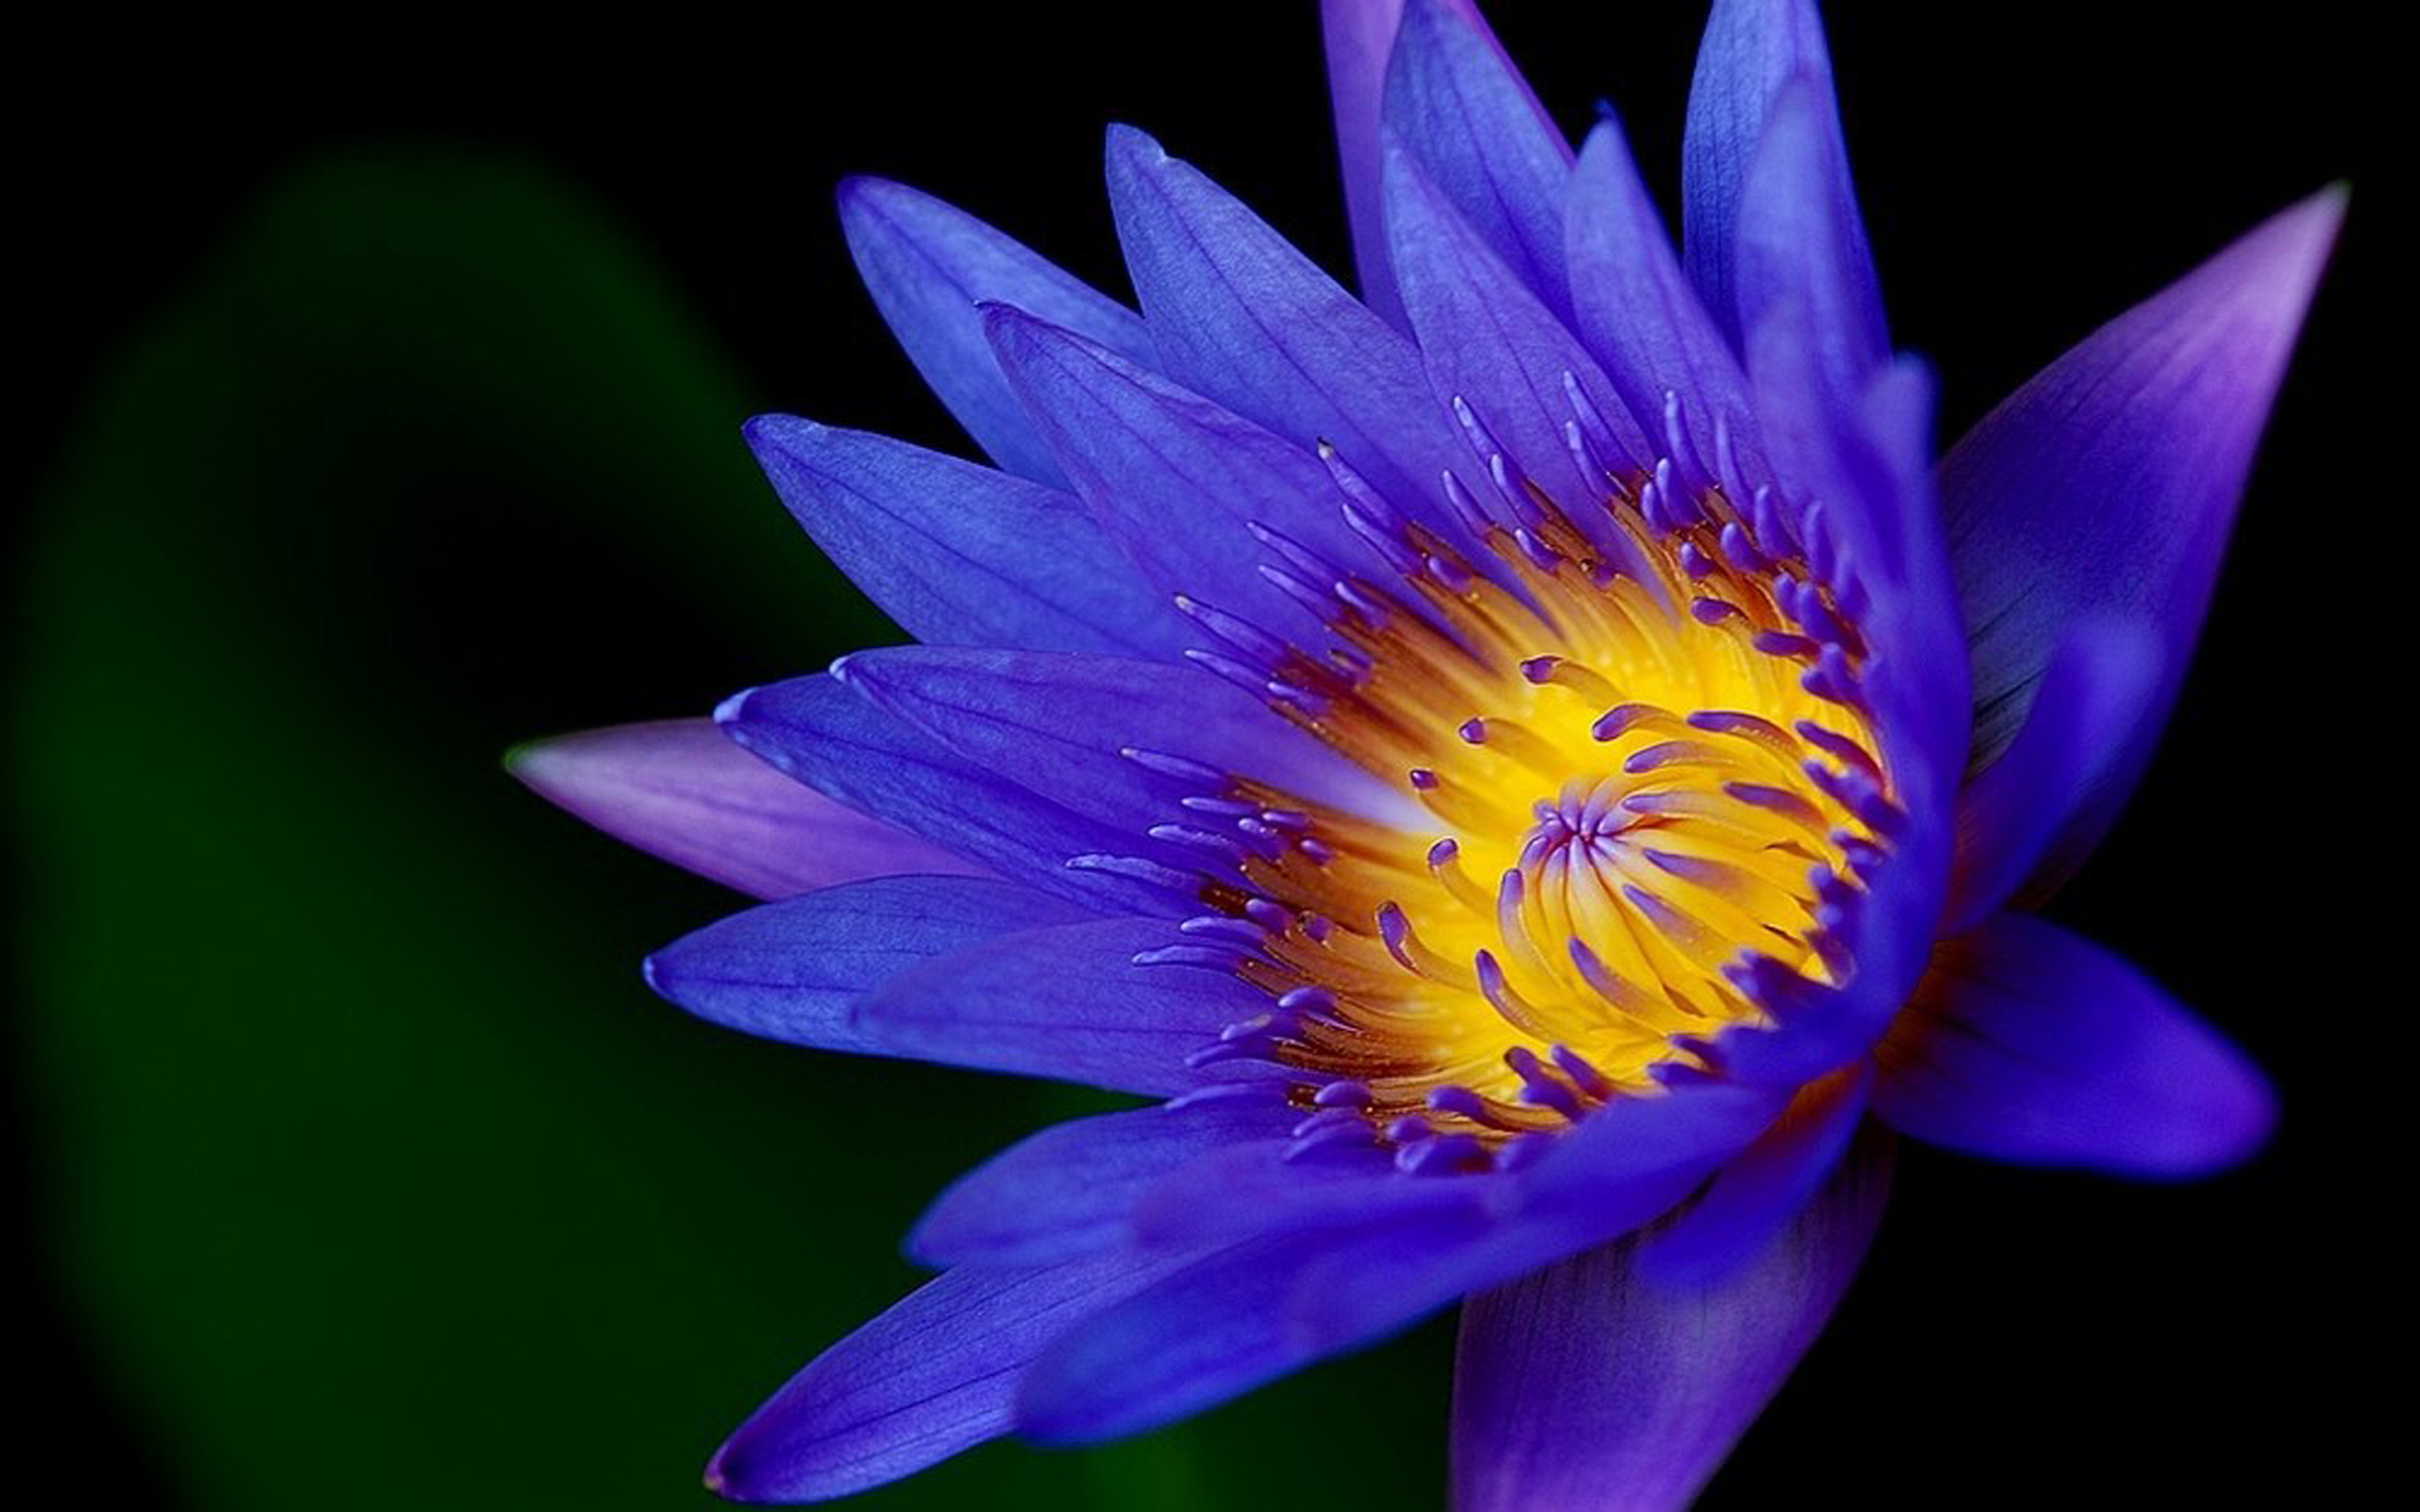 Lotus Flower Dark Blue Color Hd Wallpapers For Mobile Phones And